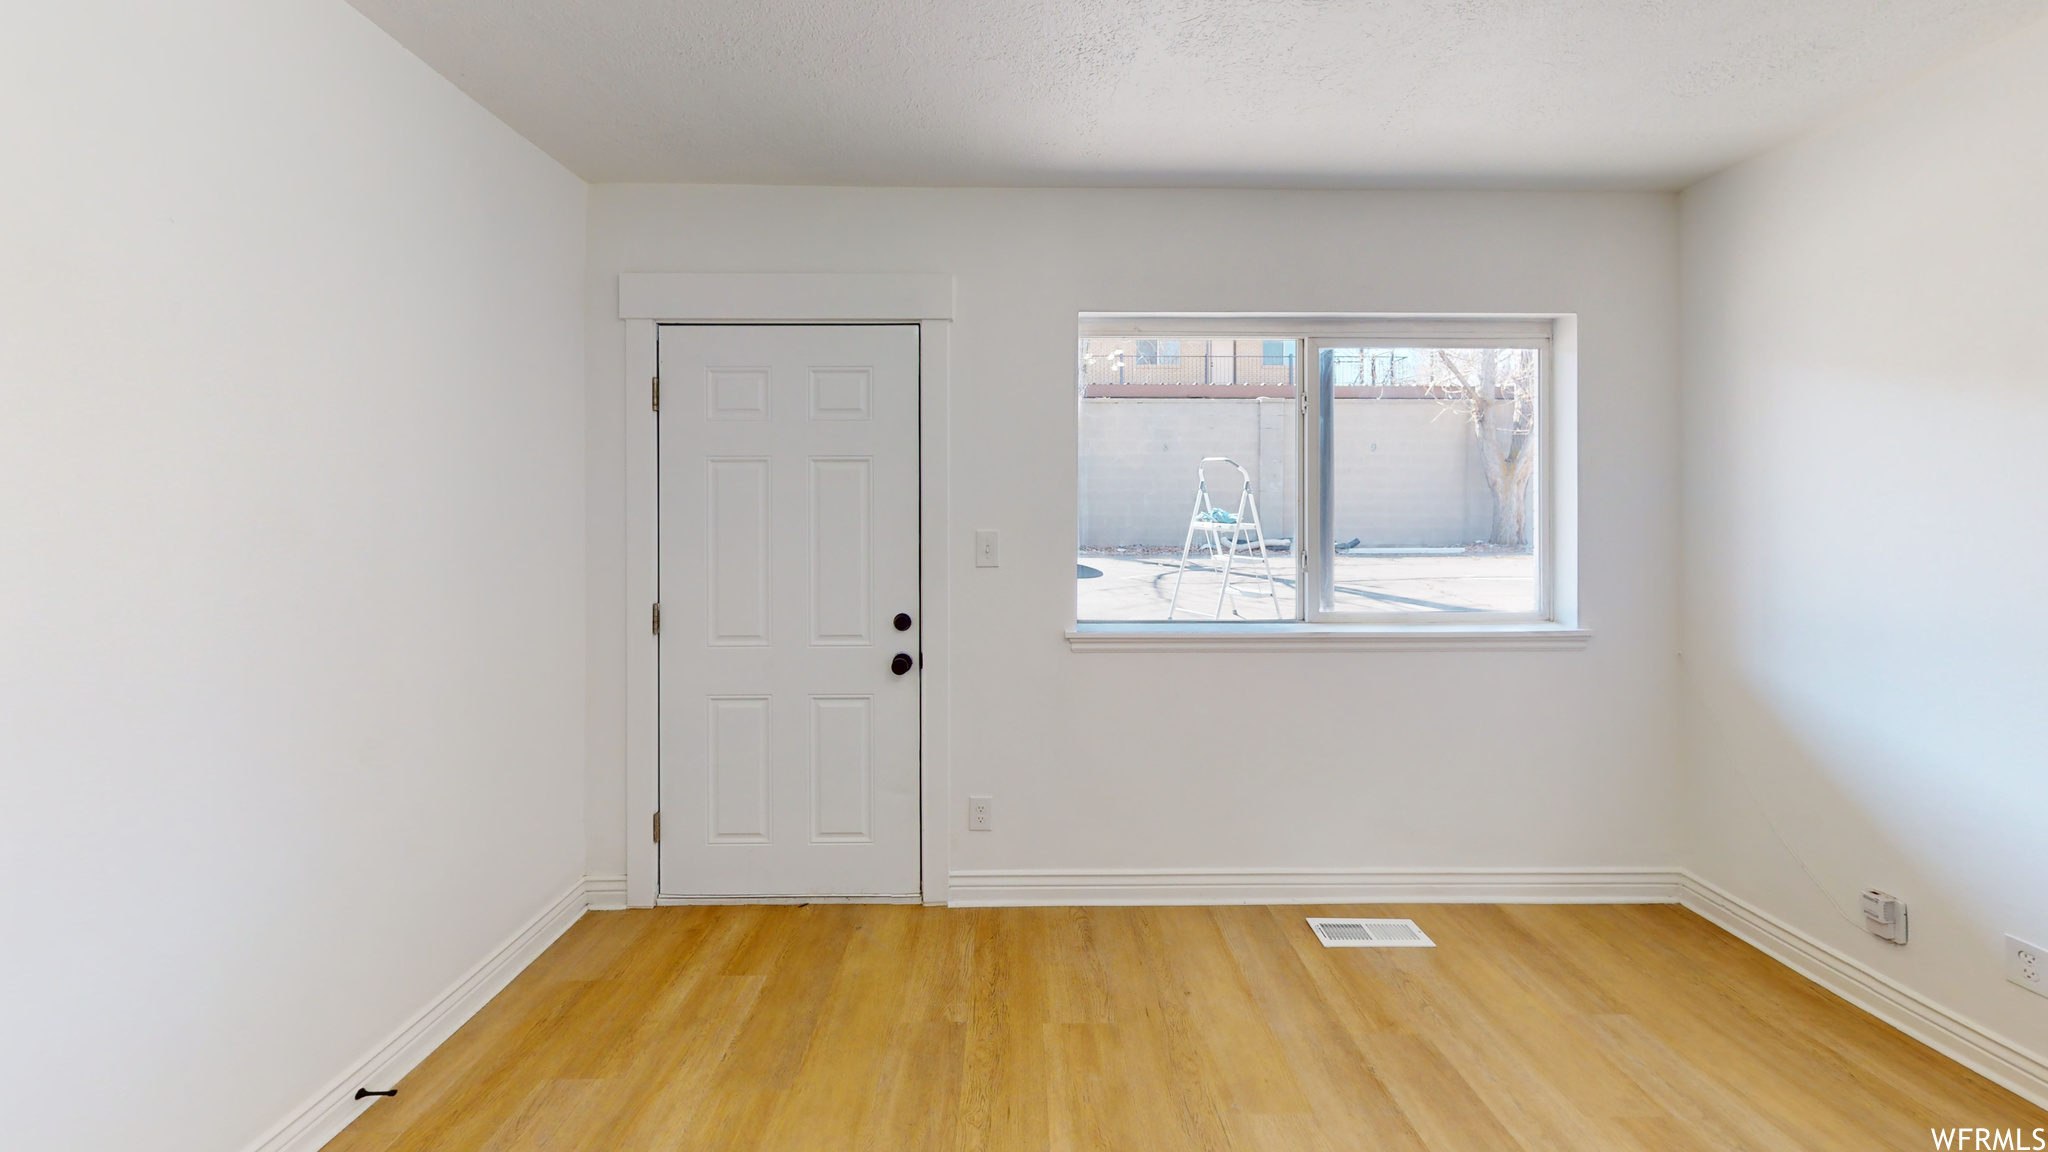 back 6 units (4,5,6,7,8,9). Hardwood floored empty room featuring natural light